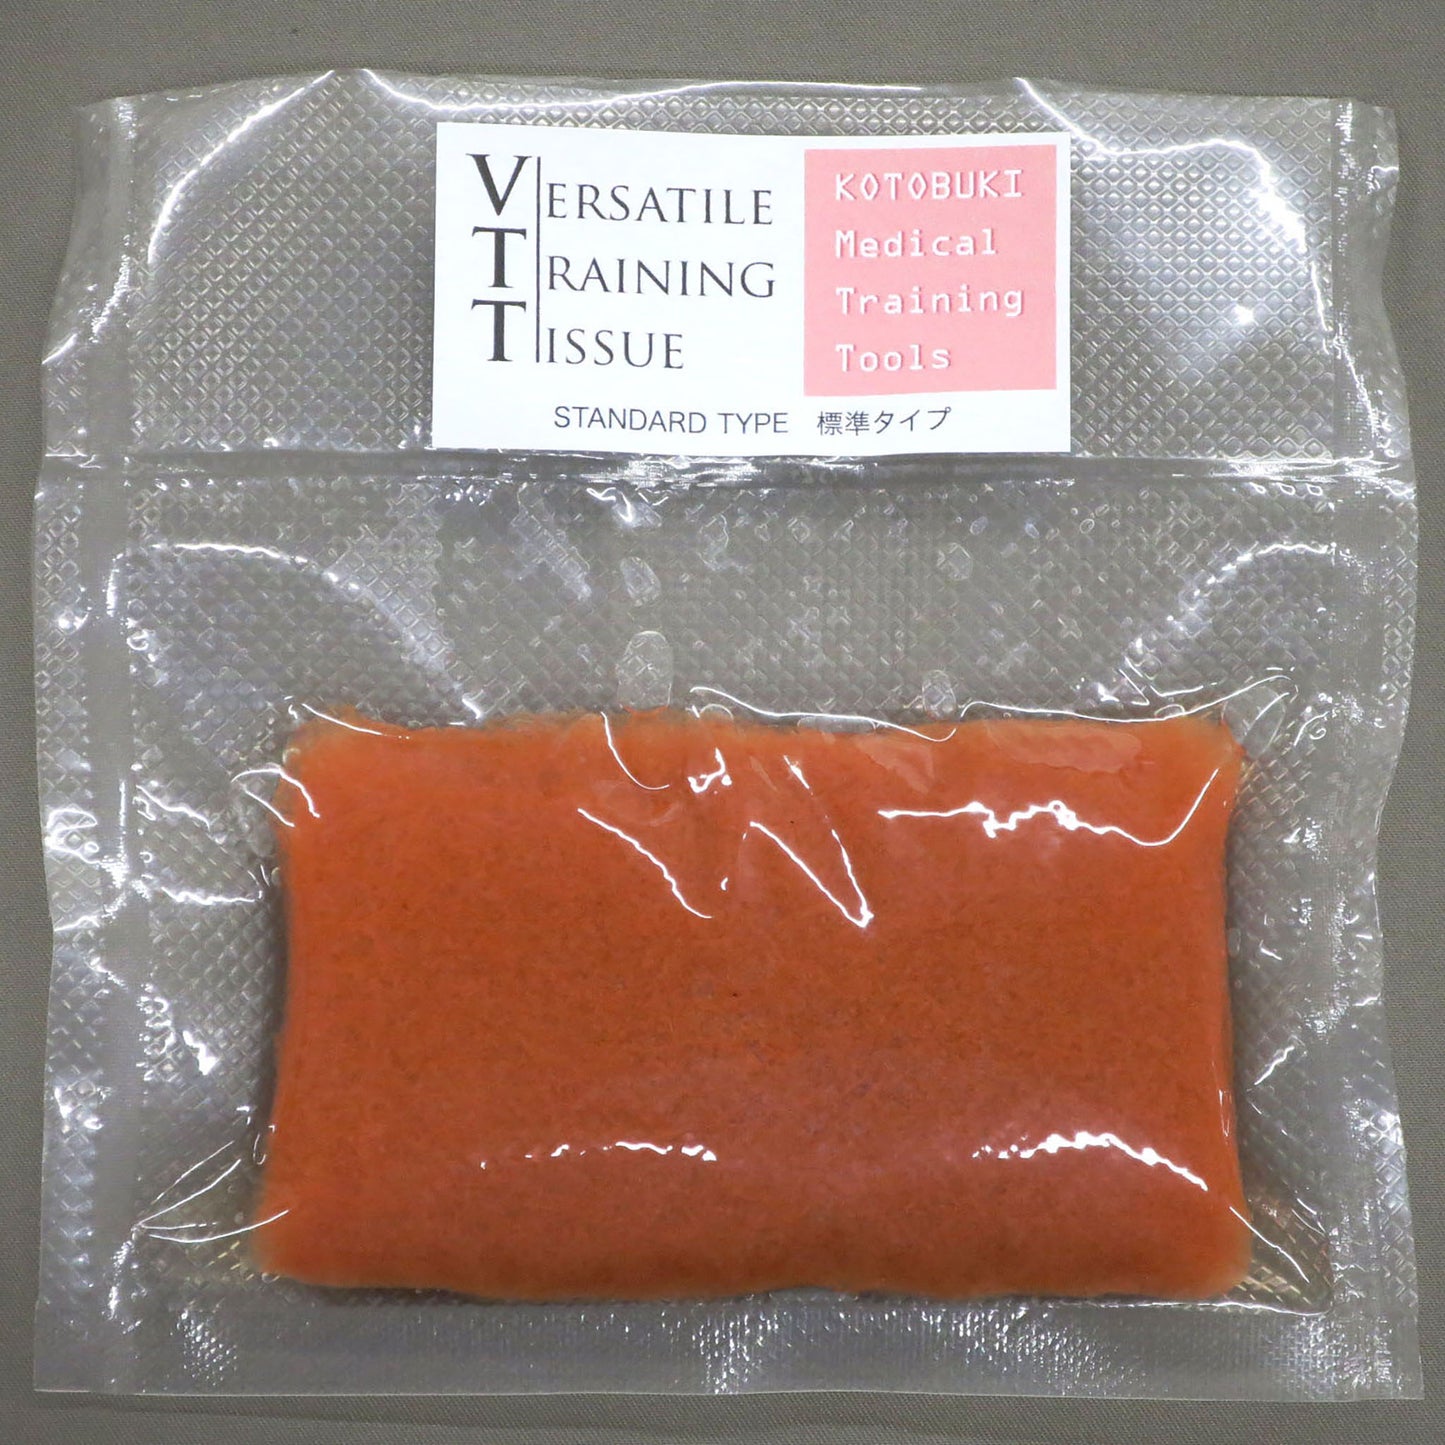 The VTT Standard Type in its shrink-wrapped packaging against a gray background. 